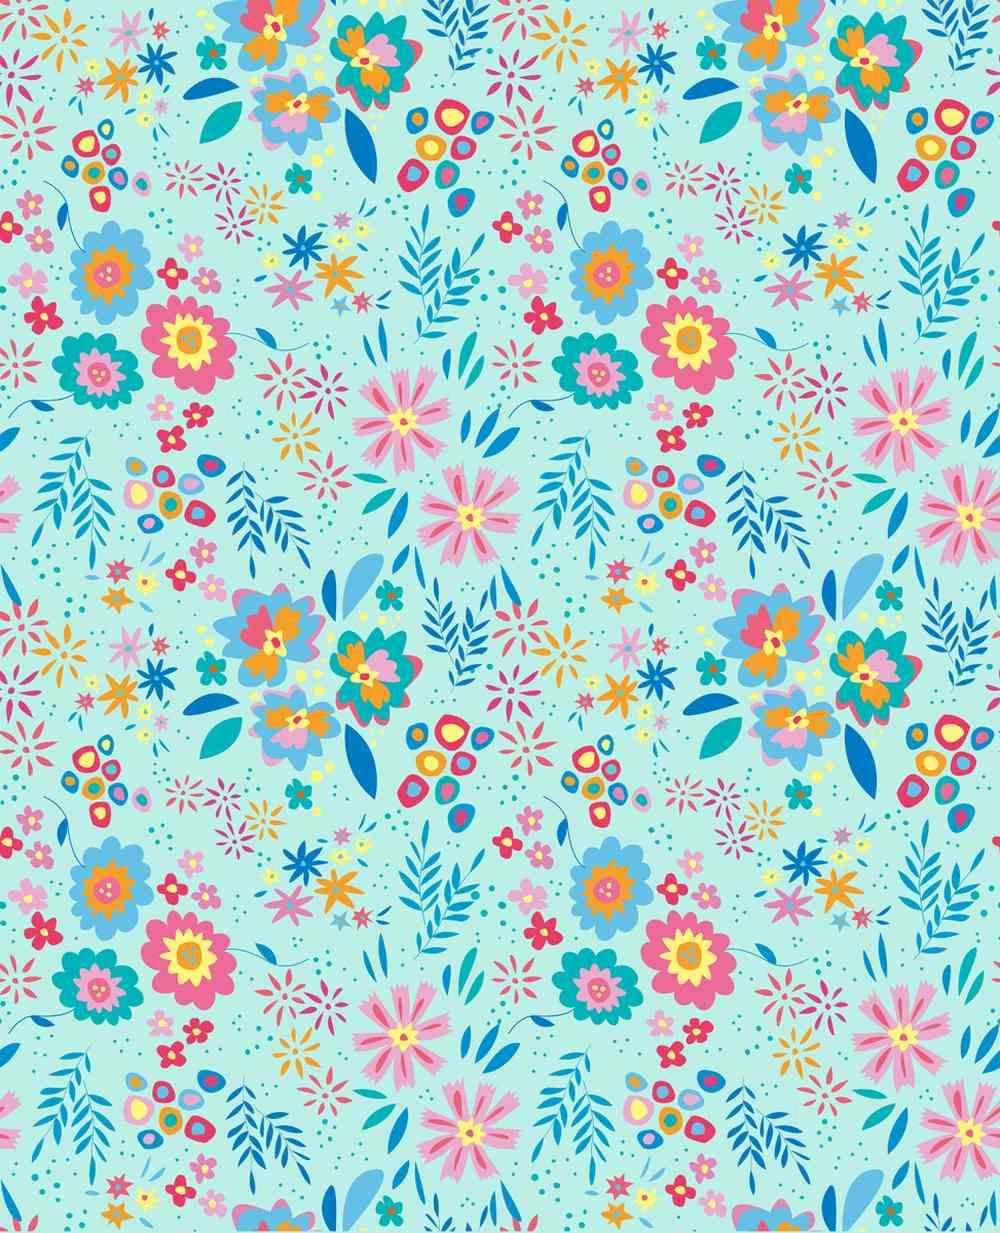 A digital repeat pattern illustration featuring colourful flowers on a light blue background. Colours include blues, yellows, greens and oranges.